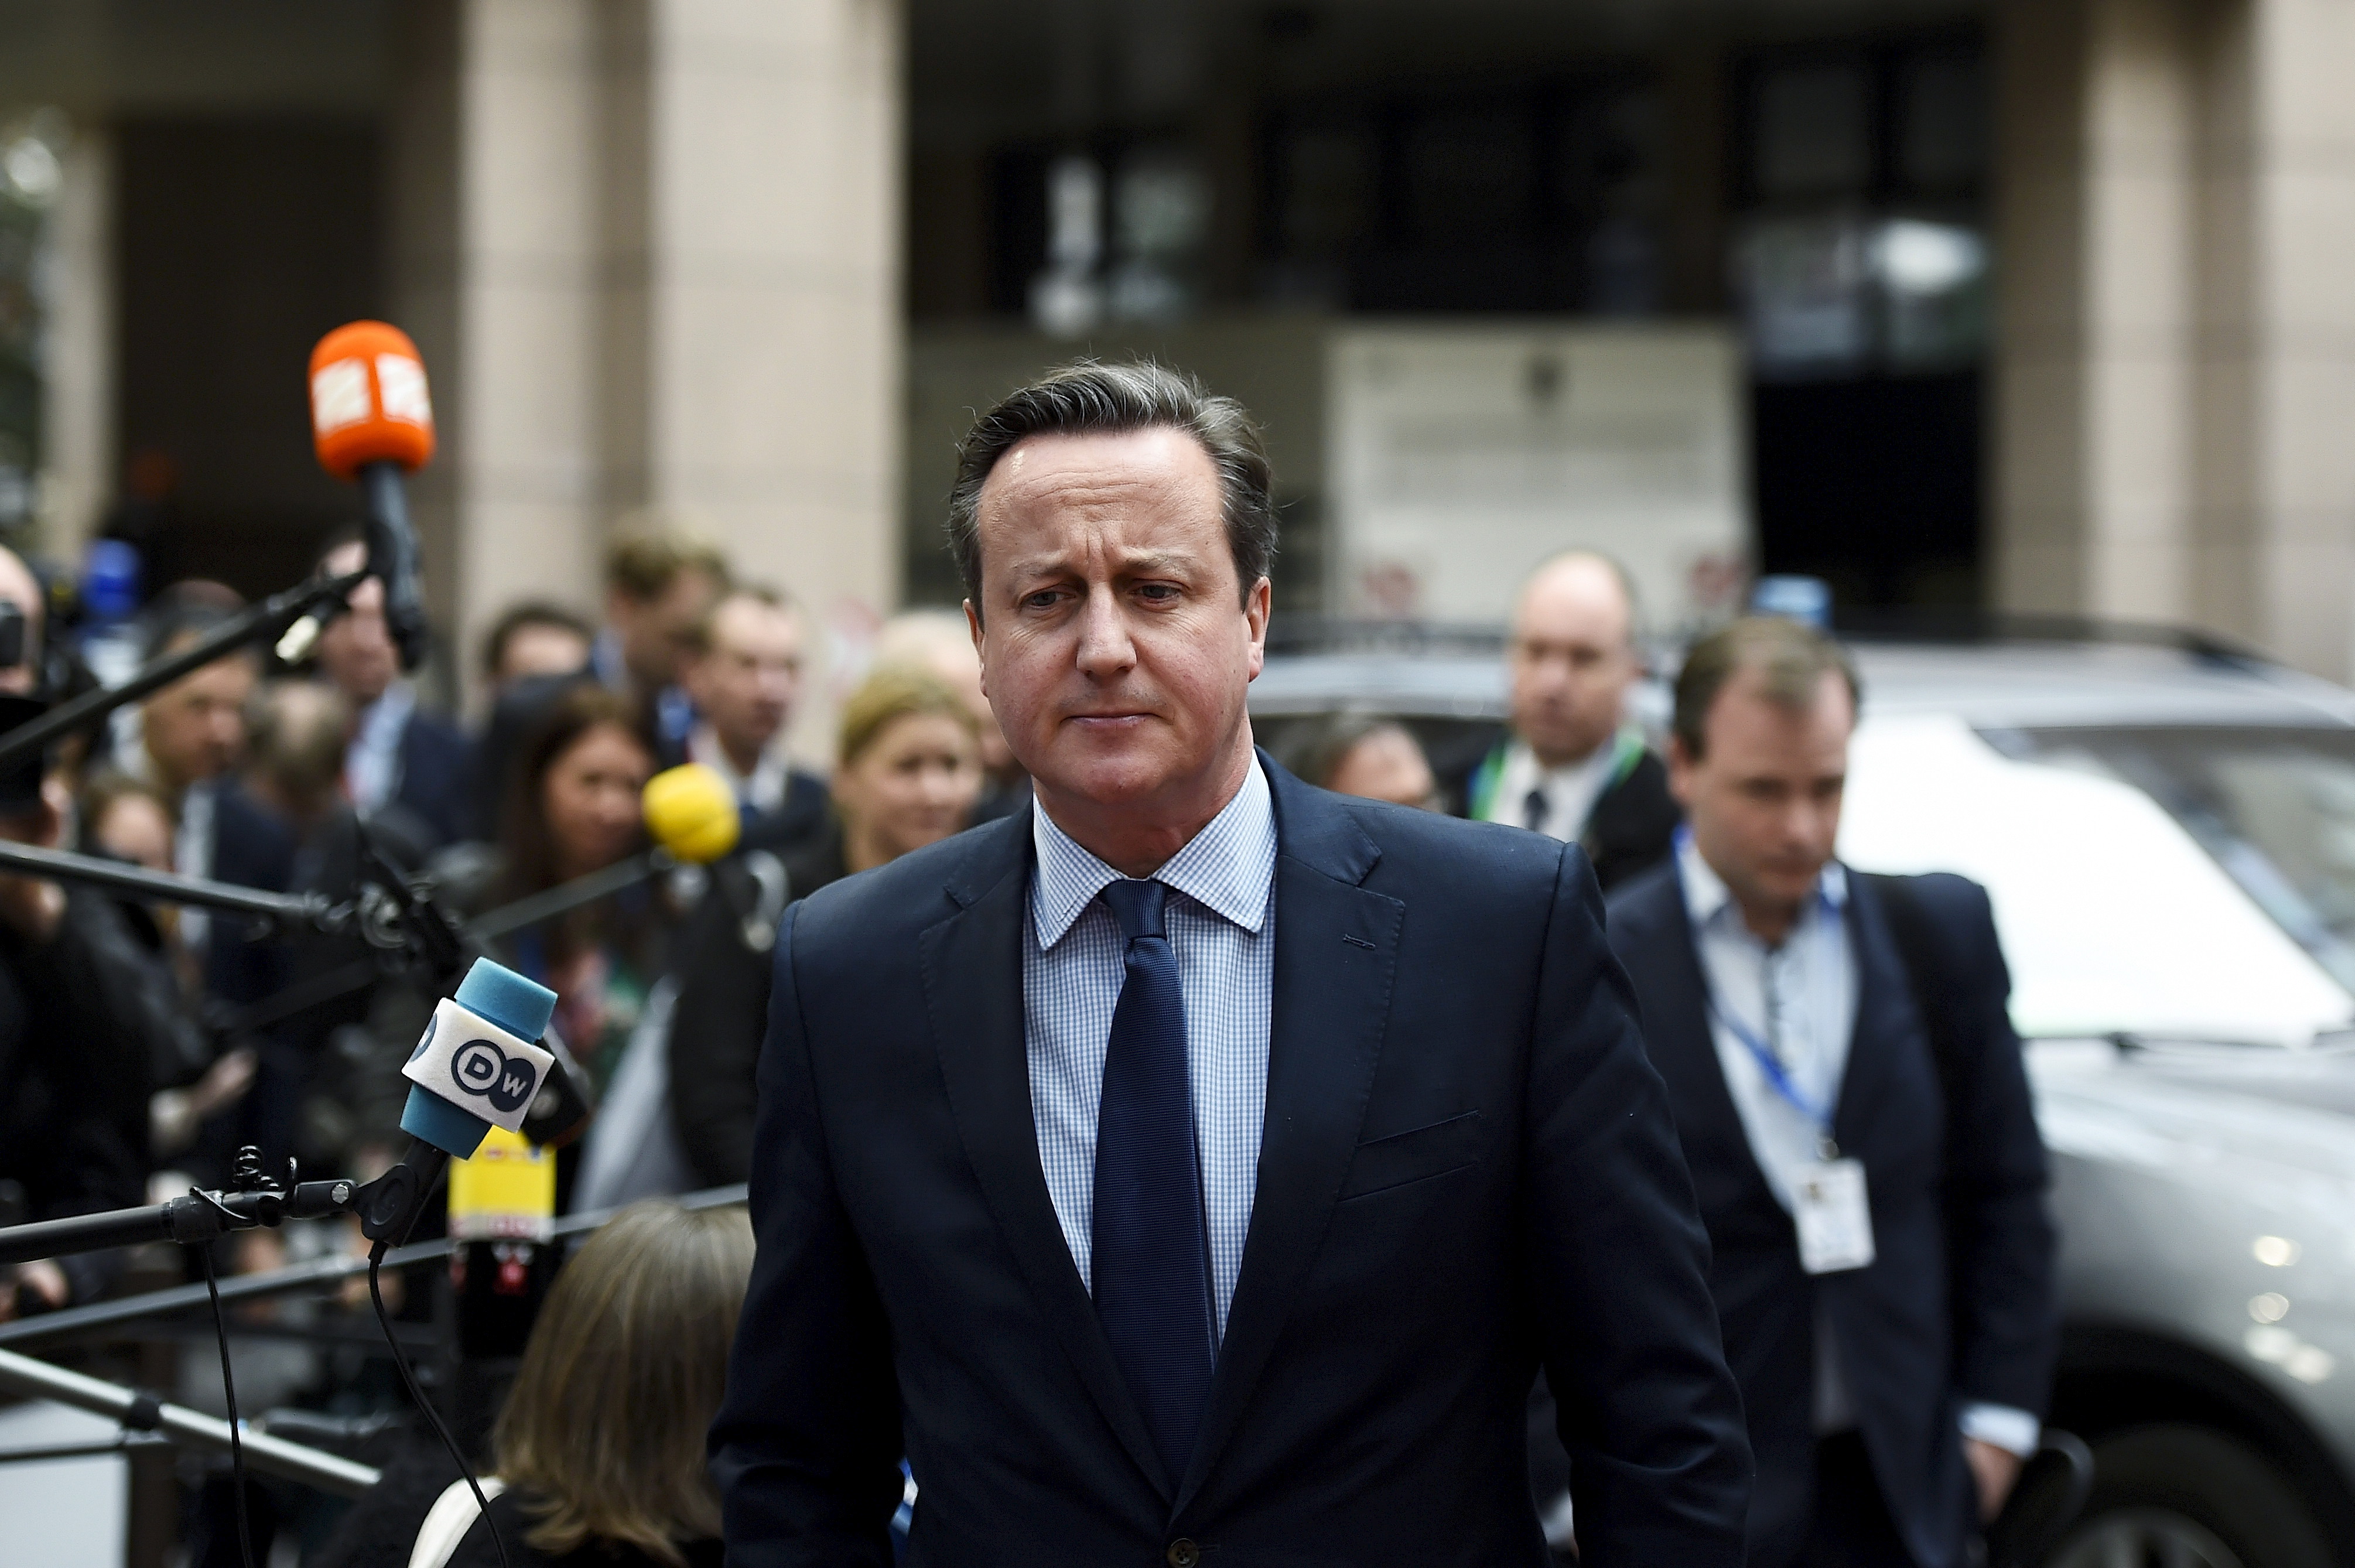 Prime Minister David Cameron leads the campaign to remain part of the European Union.